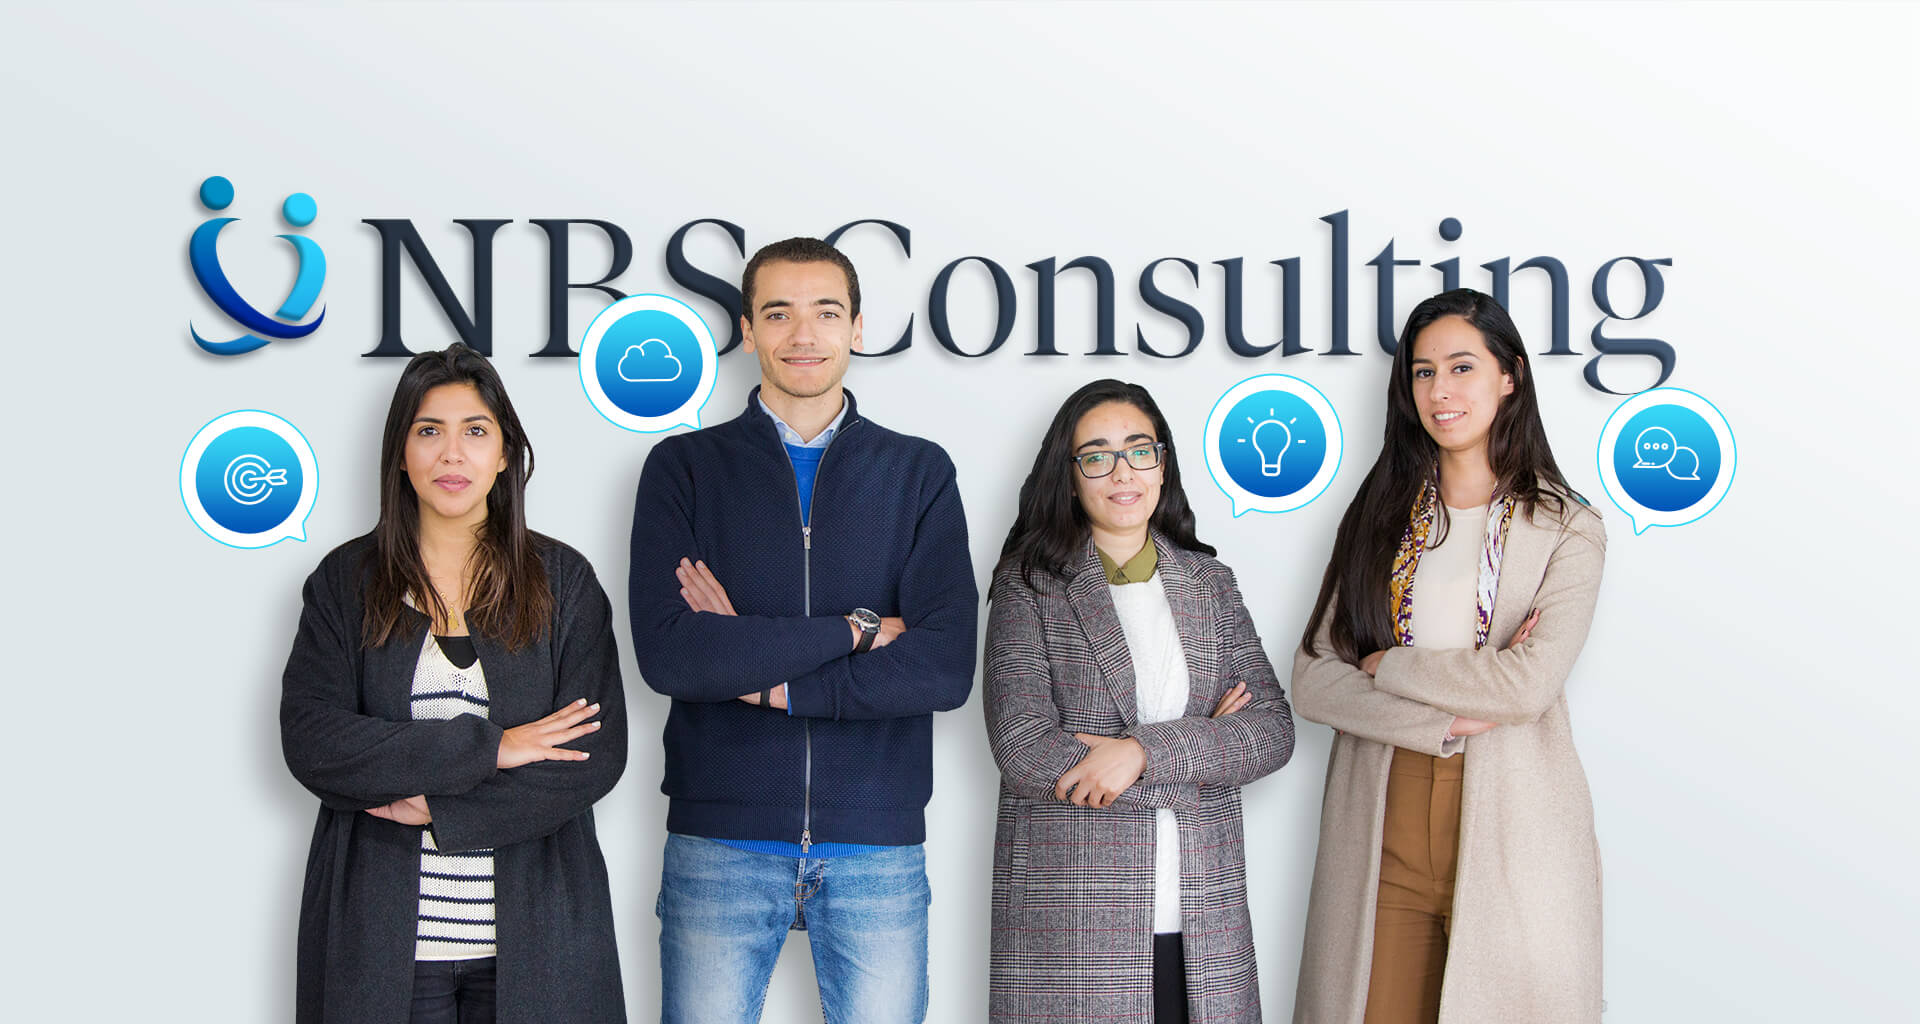 NBS Consulting